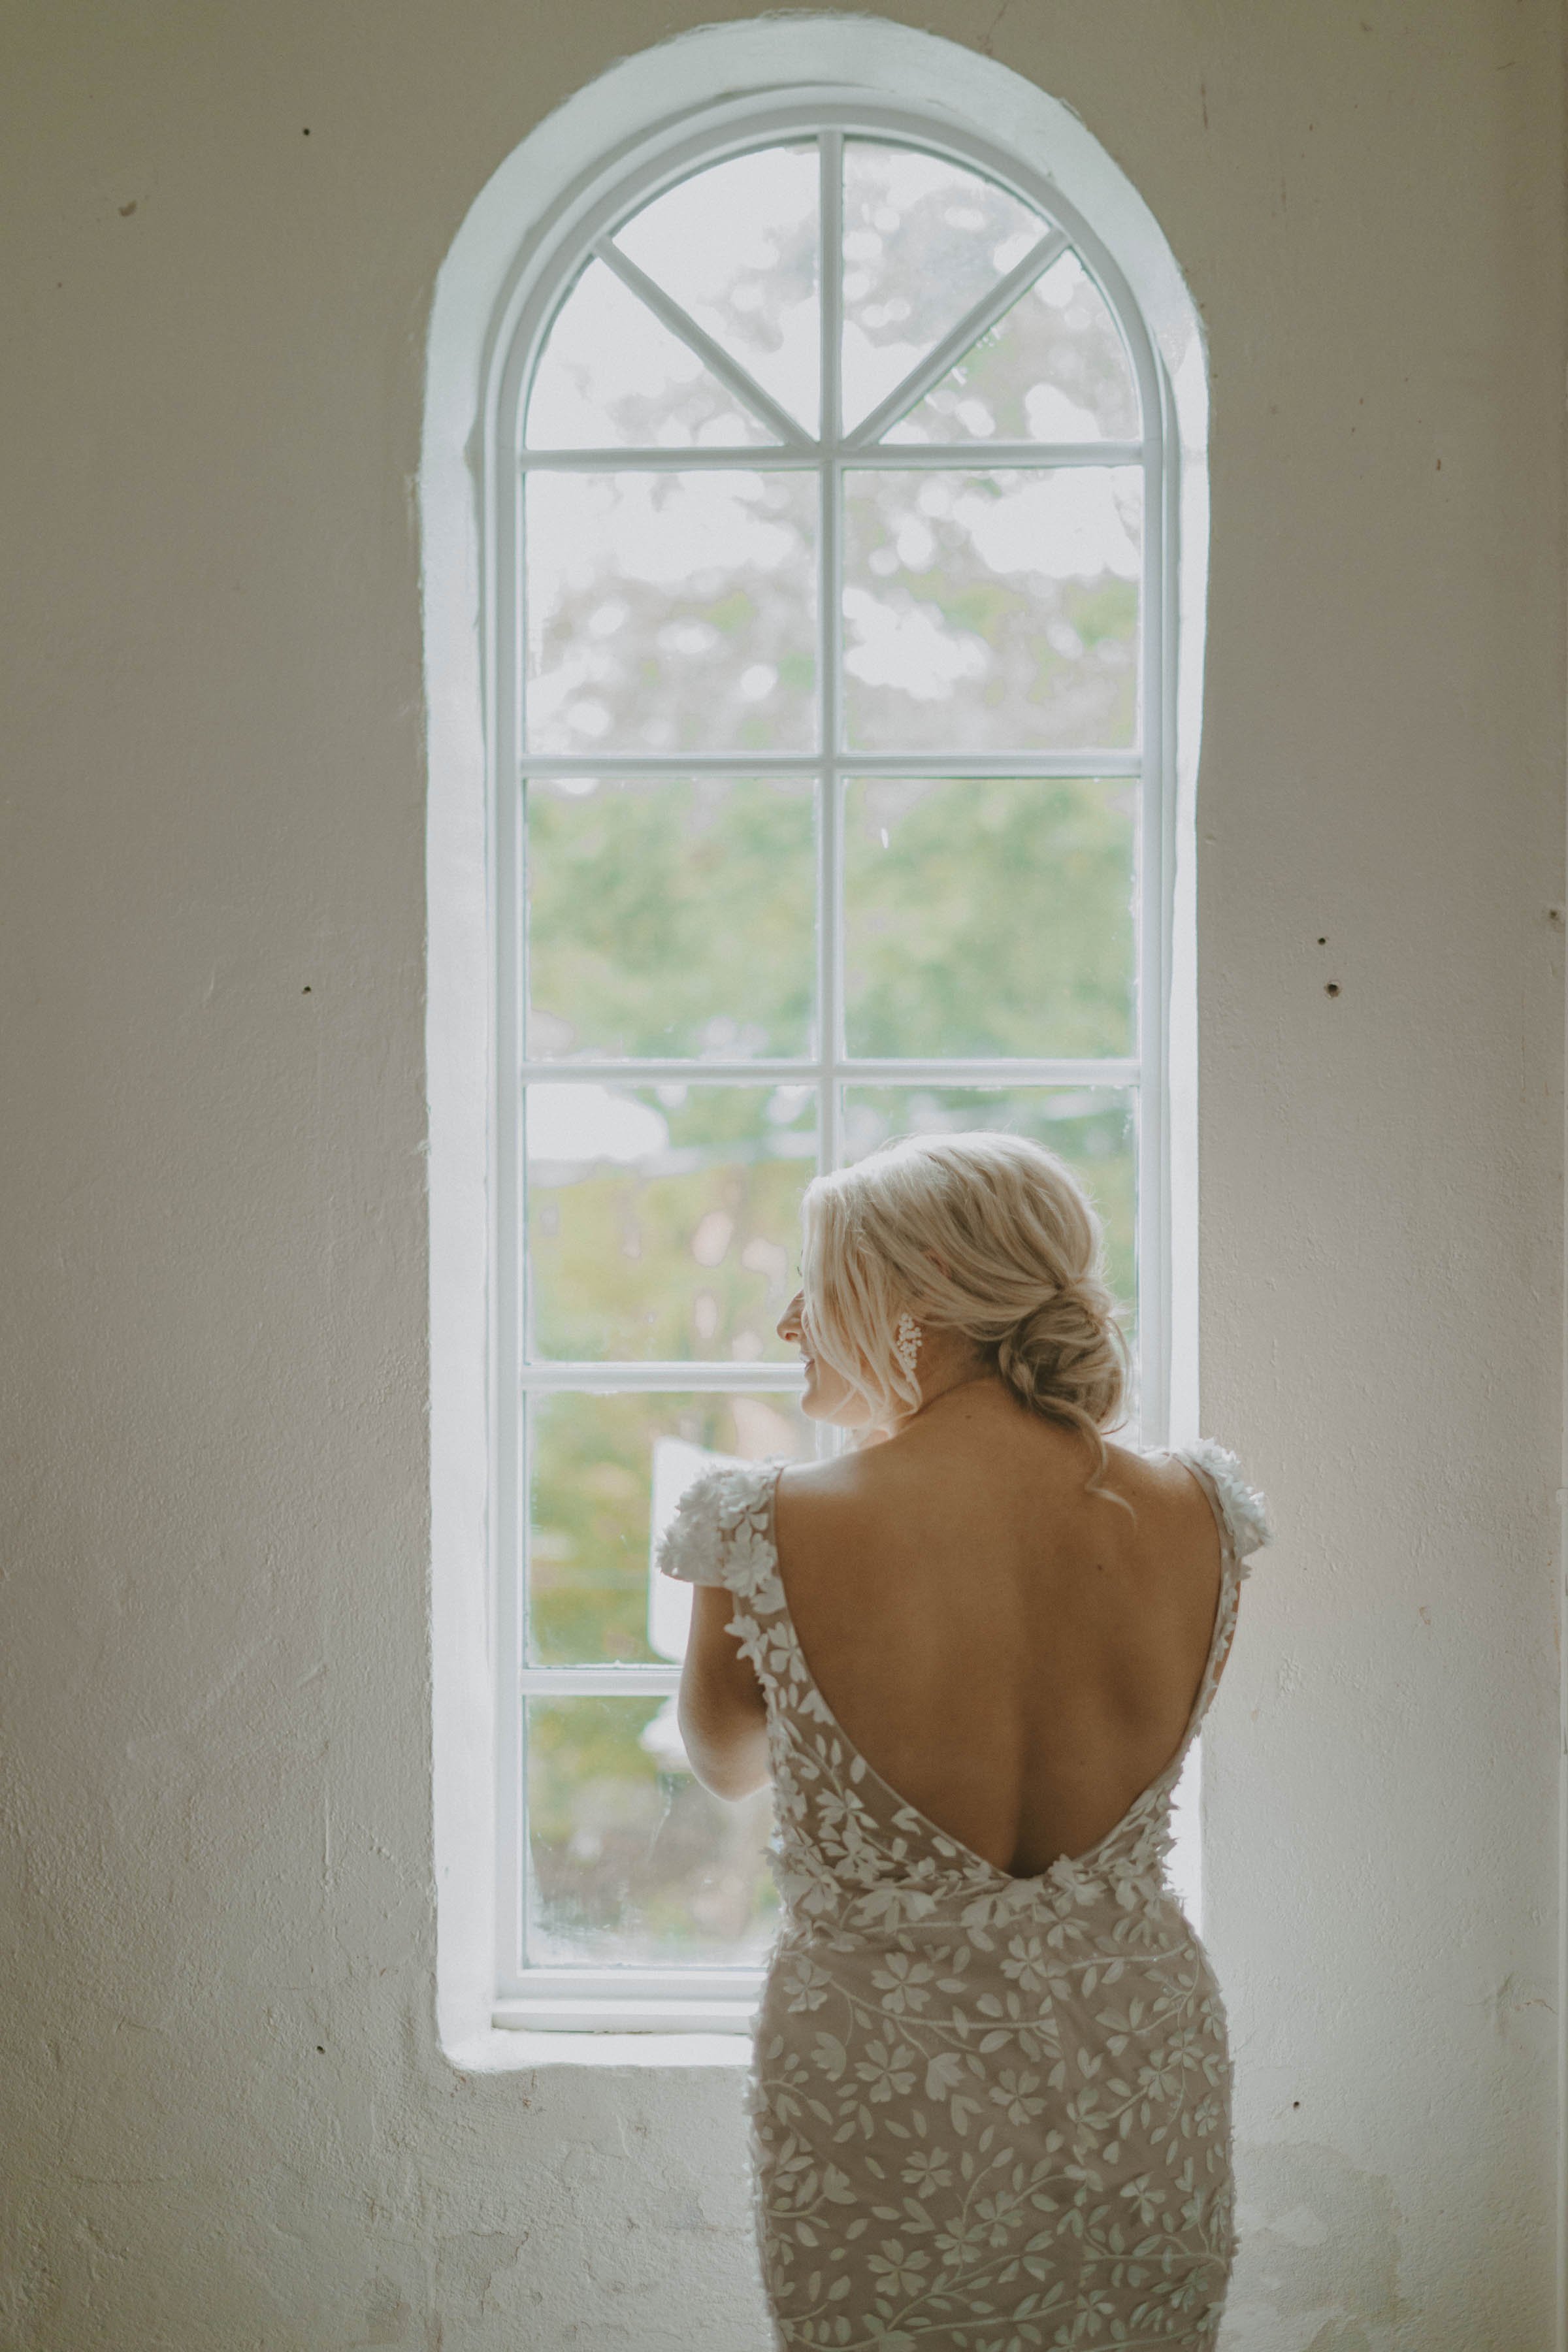 ivory-and-beau-bride-claire-in-darcy-by-made-with-love-bridal-a-sleek-modern-fitted-wedding-gown-with-cap-sleeves-a-plunging-illusion-neckline-and-3d-floral-applique-available-from-savanna-bridal-shop-ivory-and-beau-7.jpg